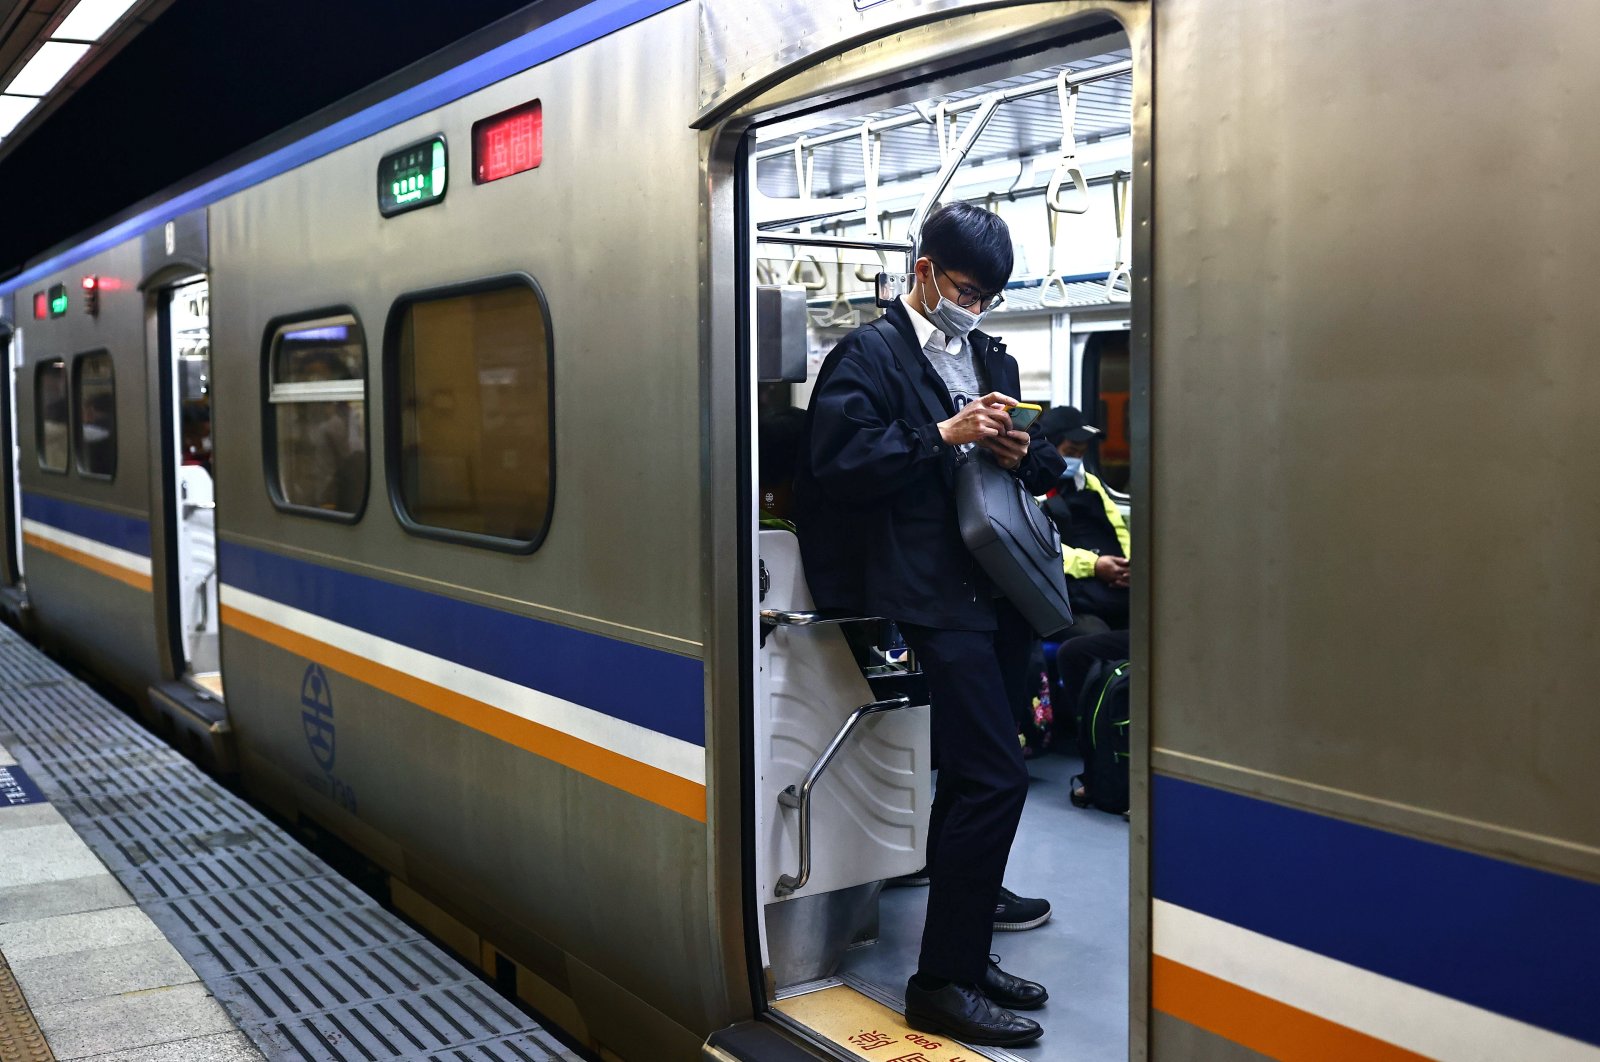 A man wears a protective mask to prevent the spread of the coronavirus disease (COVID-19) while taking the train in Taipei, Taiwan, Nov. 3, 2020. (Reuters Photo)